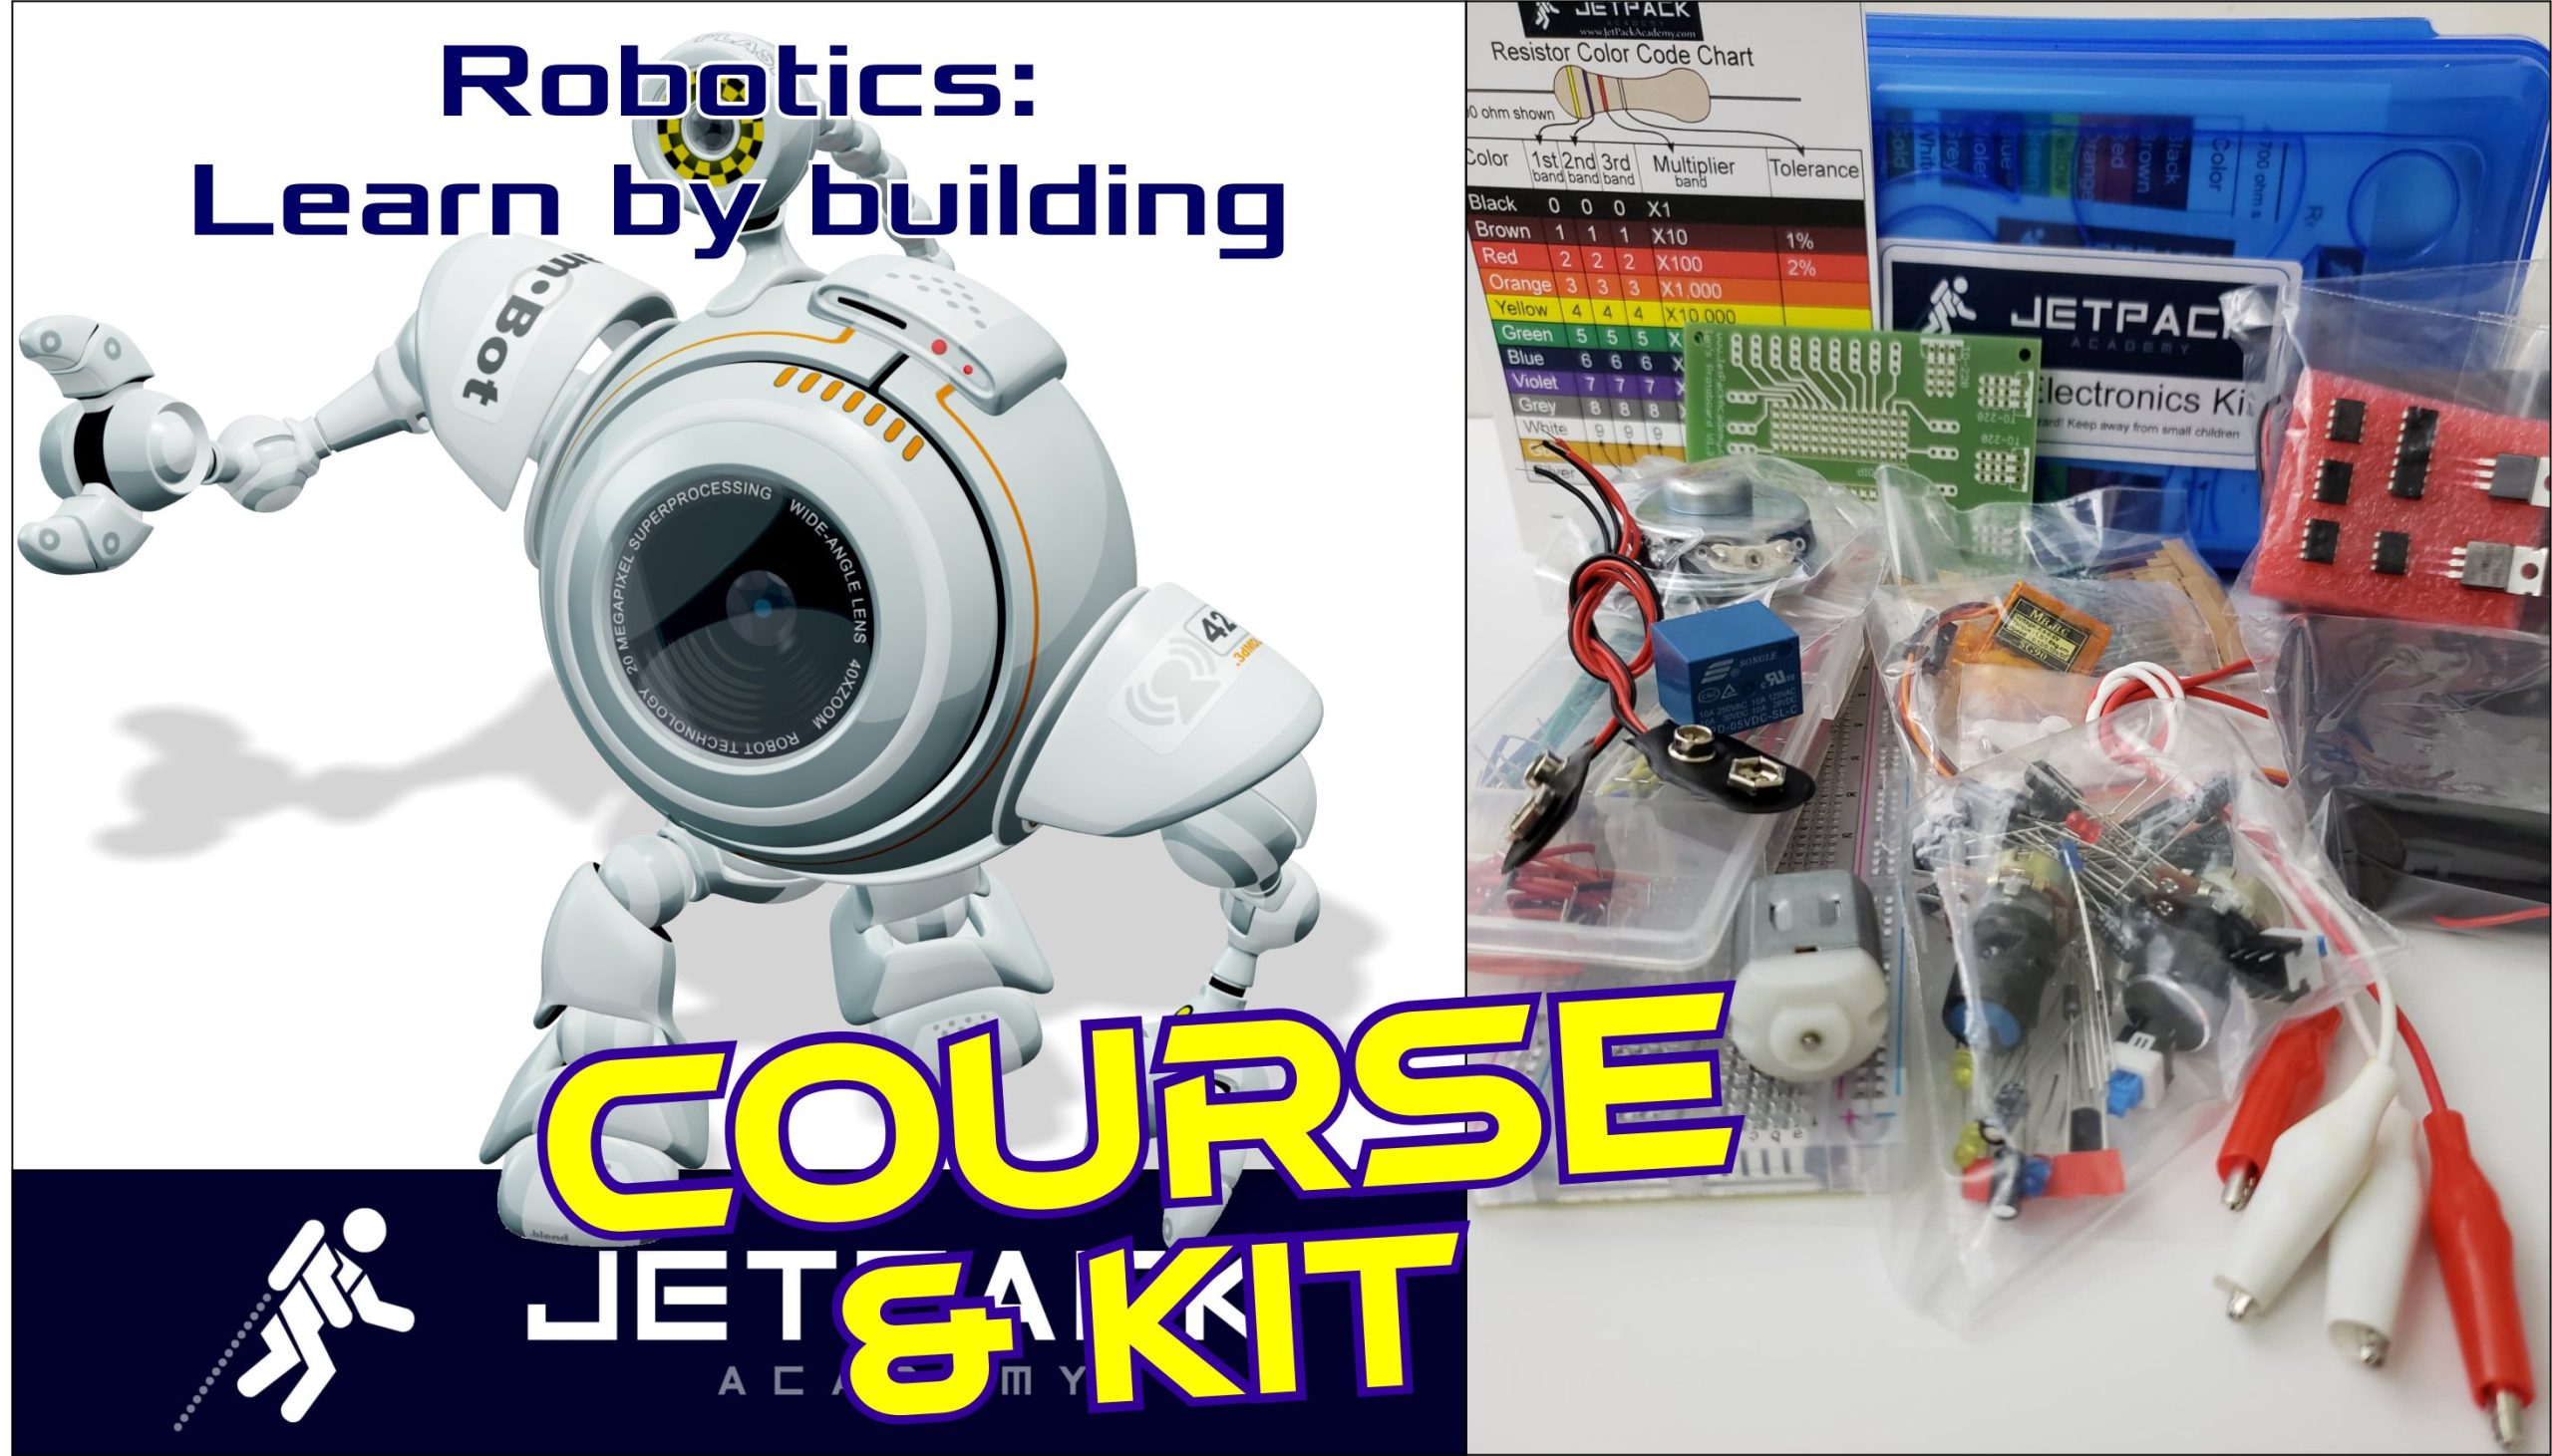 Digital Electronics Kit for module II of Robotics, learn by building